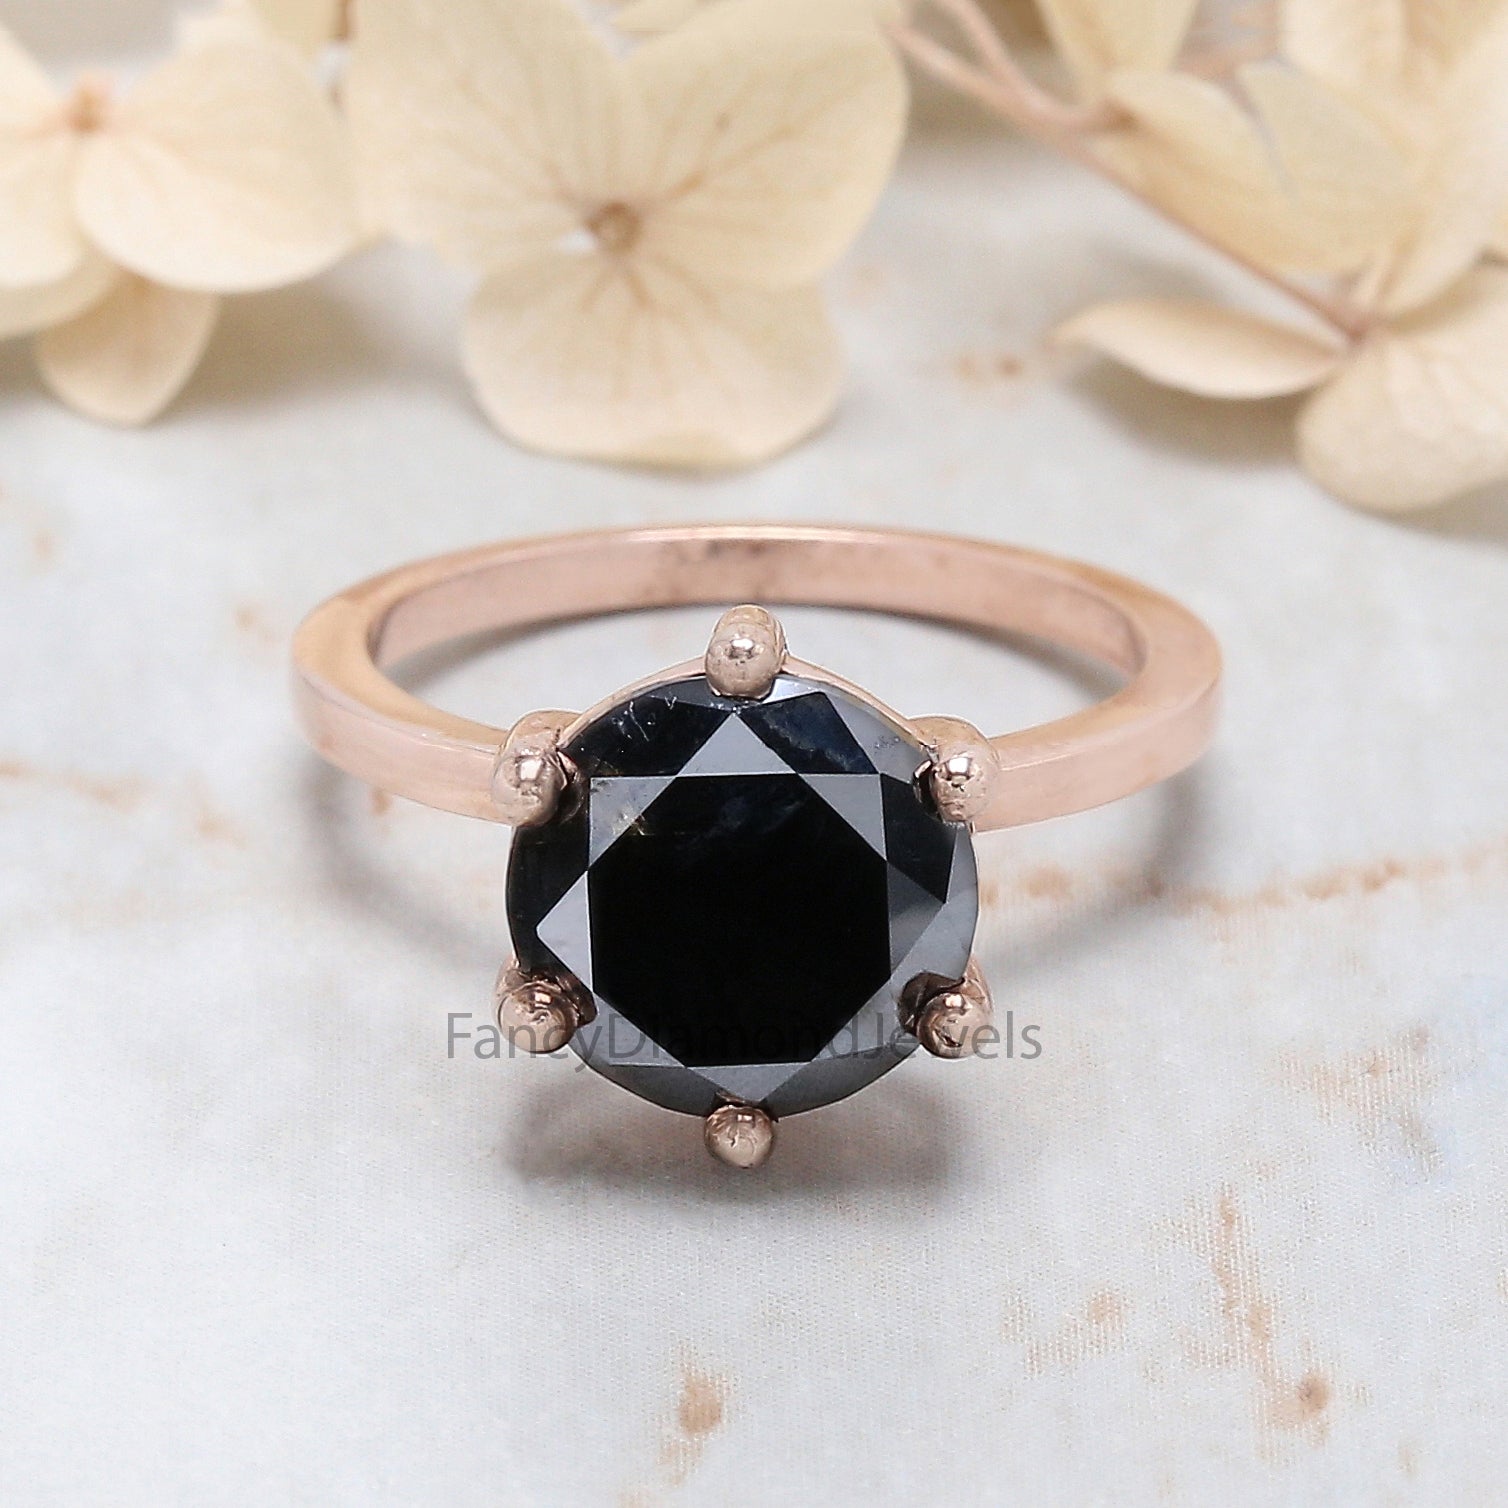 Round Shape Black Color Diamond Ring 4.23 Ct 9.67 MM Round Cut Diamond Ring 14K Solid Rose Gold Silver Engagement Ring Gift For Her QL9505